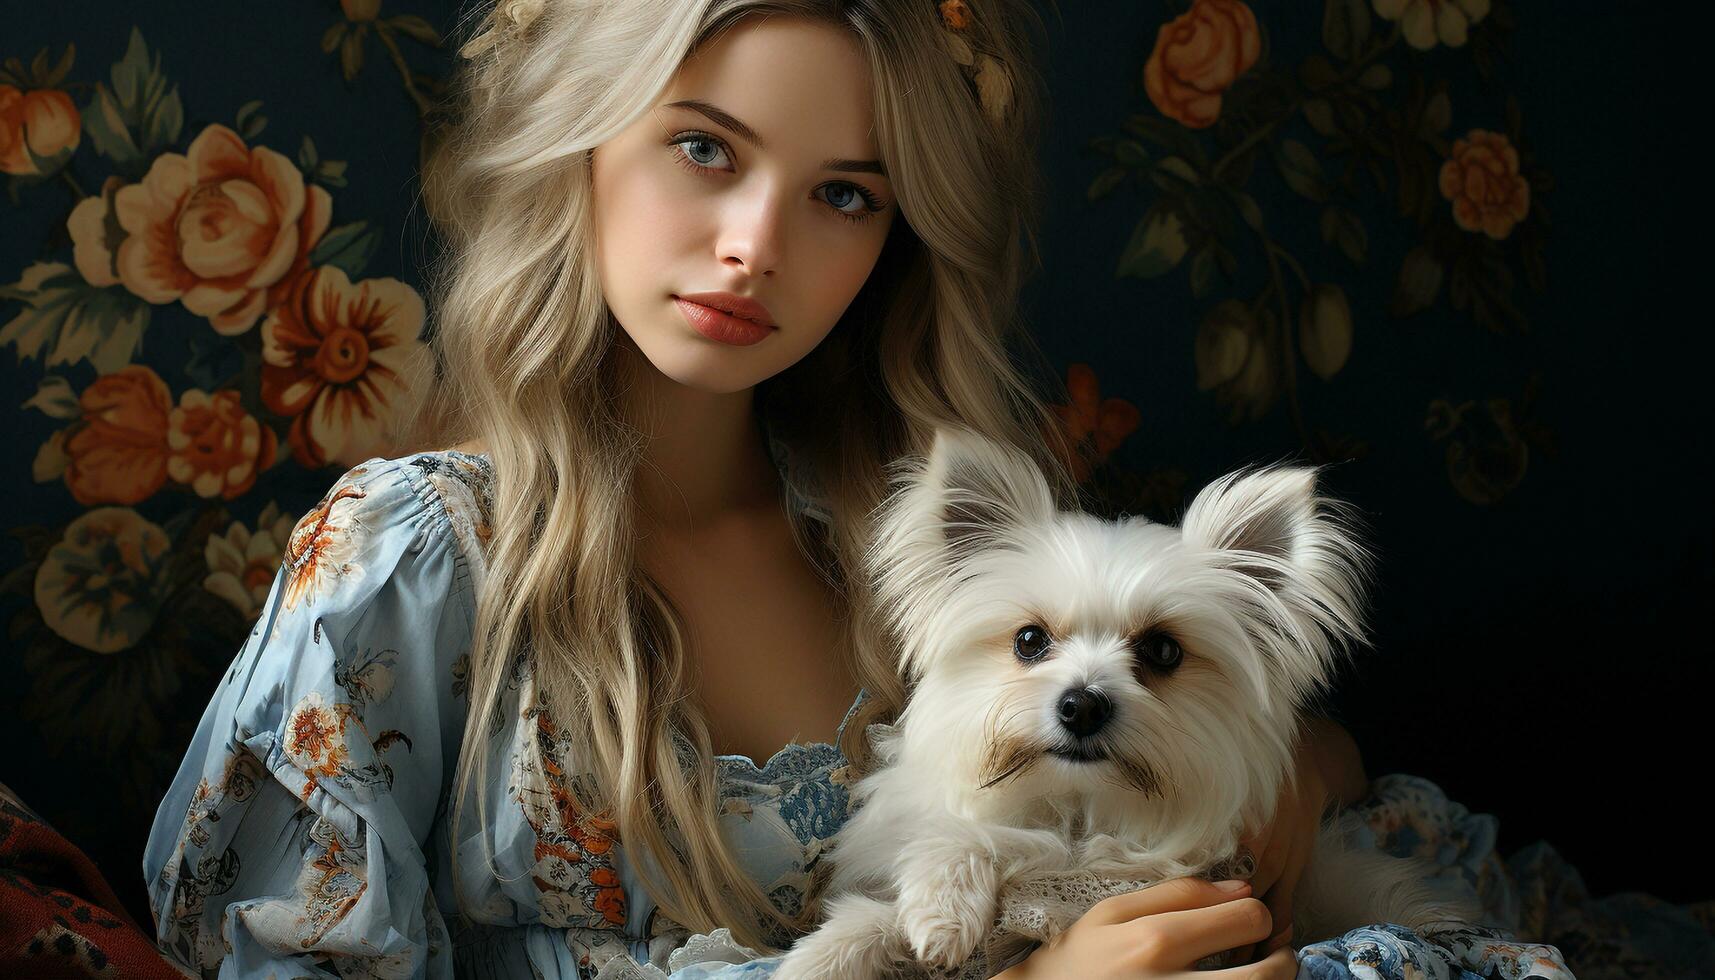 A cute dog, a woman, and a small portrait of beauty generated by AI photo